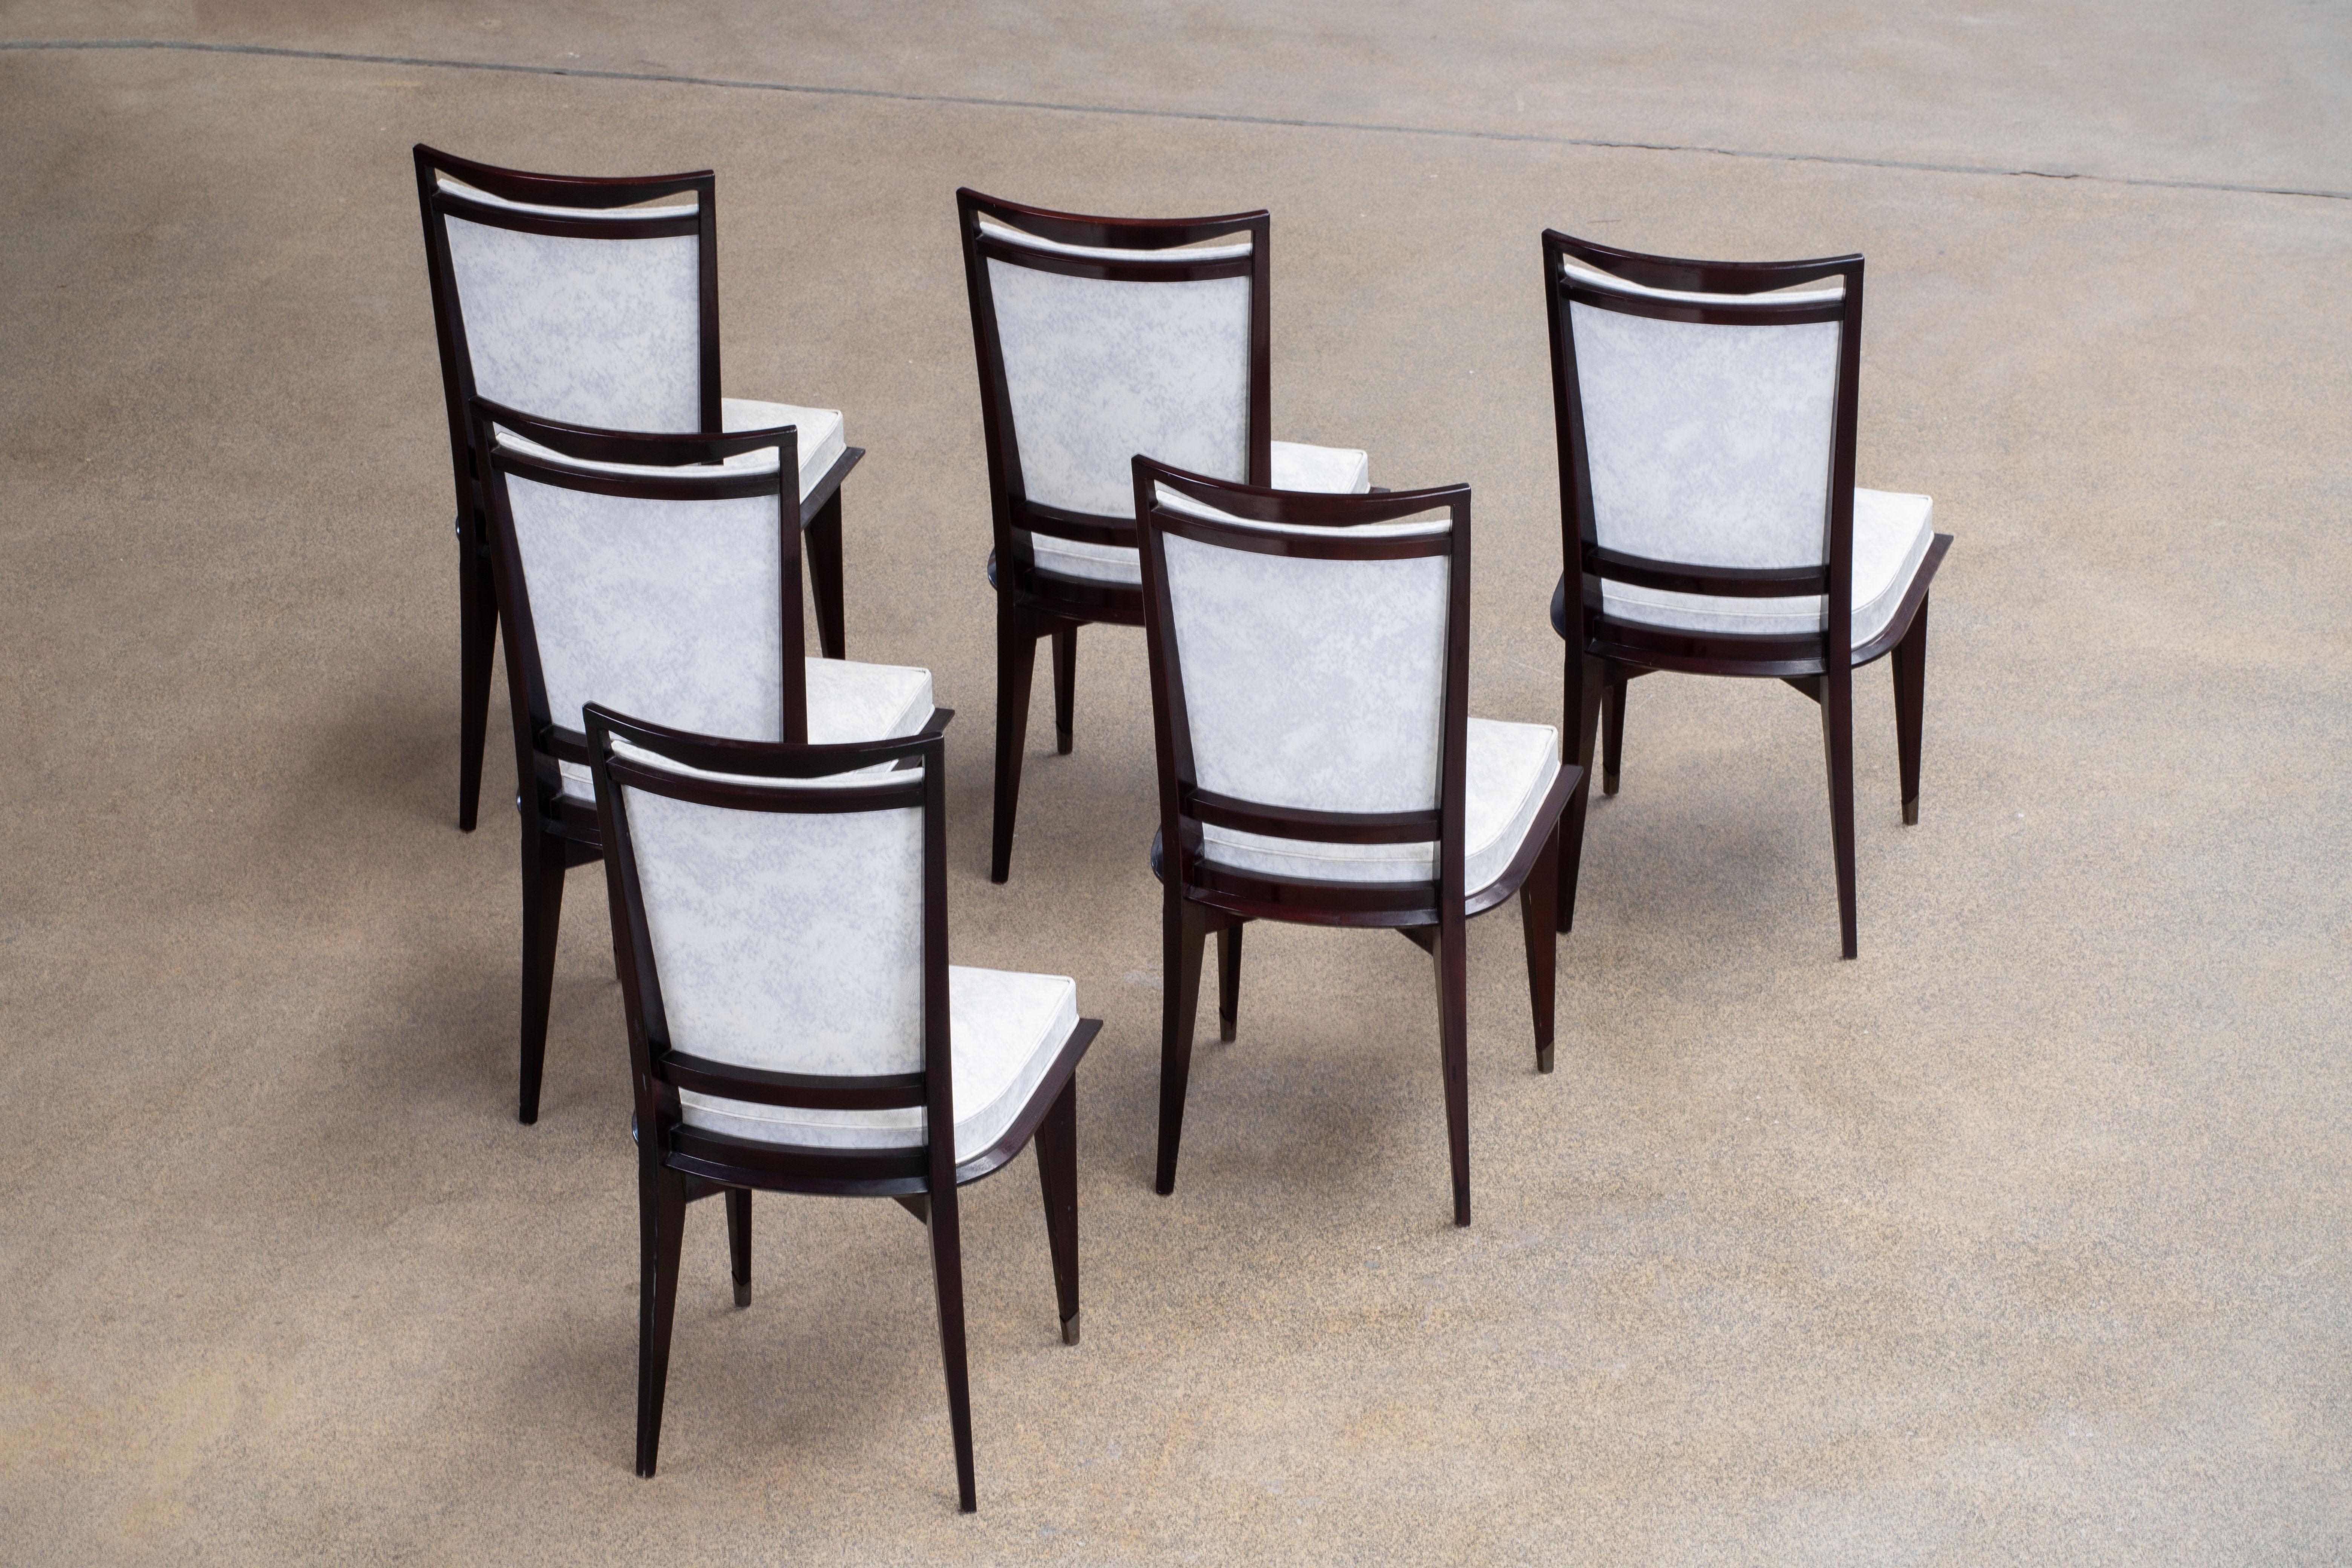 Set of six upholstered high back chairs covered in white vinyl, exhibiting traditional French design elements in a deep oak finish. Restored and polished.